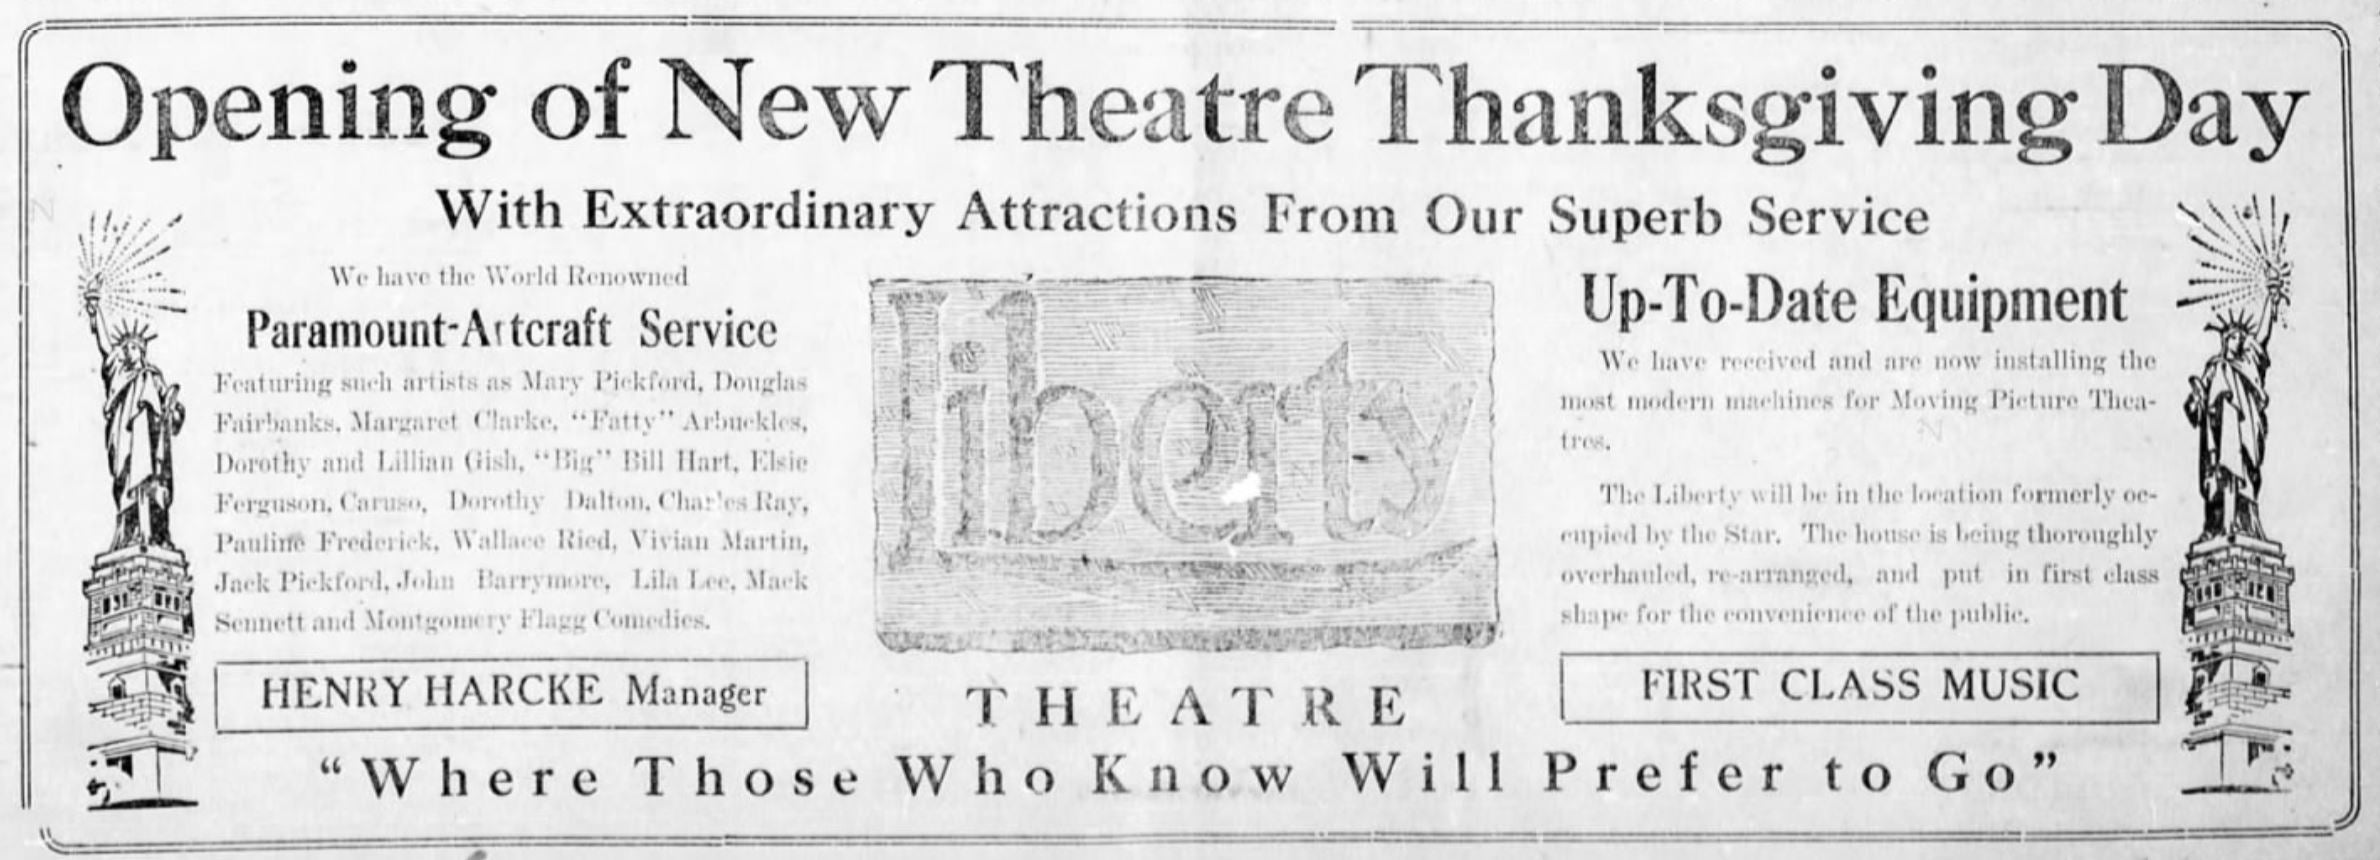 Liberty theater opens in Nov. 1918